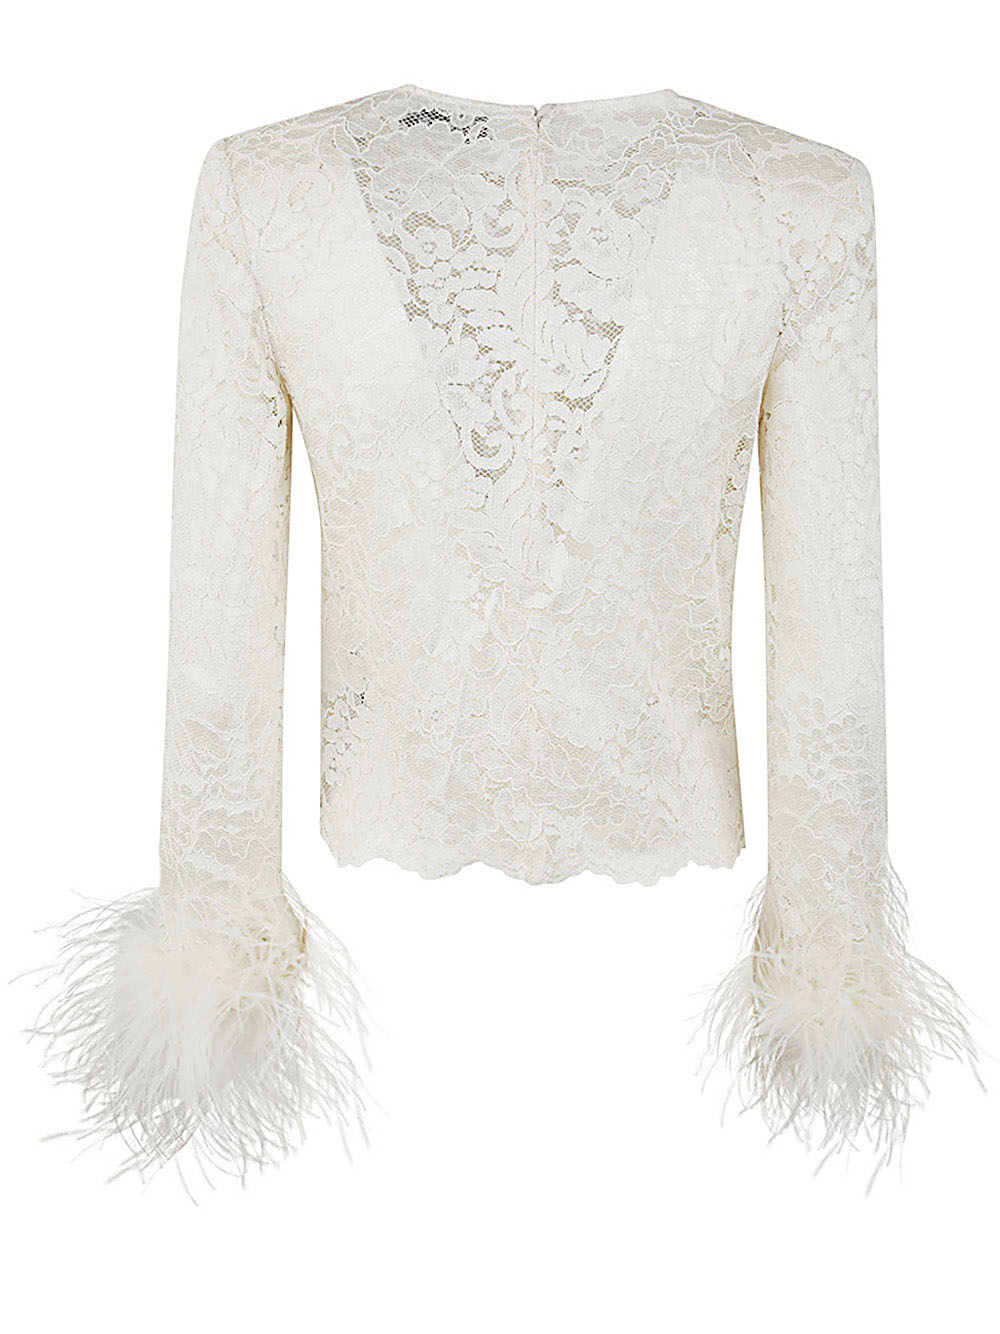 Cream Cord Lace Feather Top